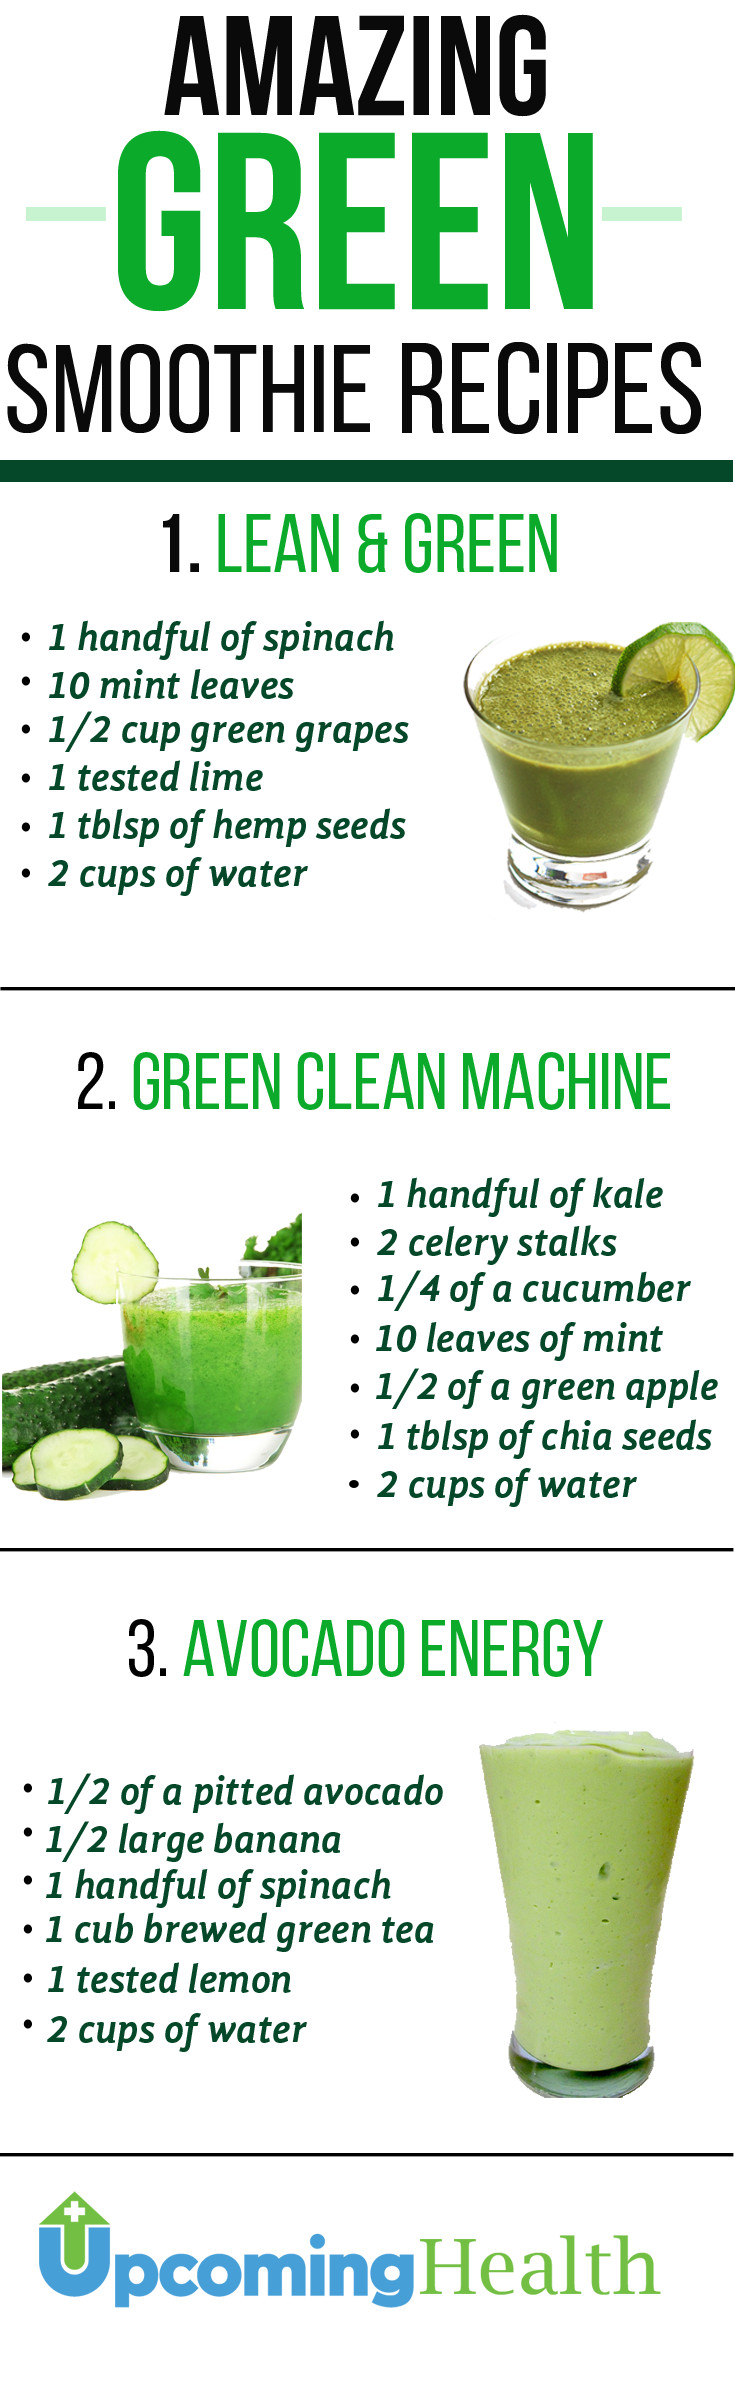 Diet Smoothie Recipes
 Green Smoothies Will Revolutionize Your Health